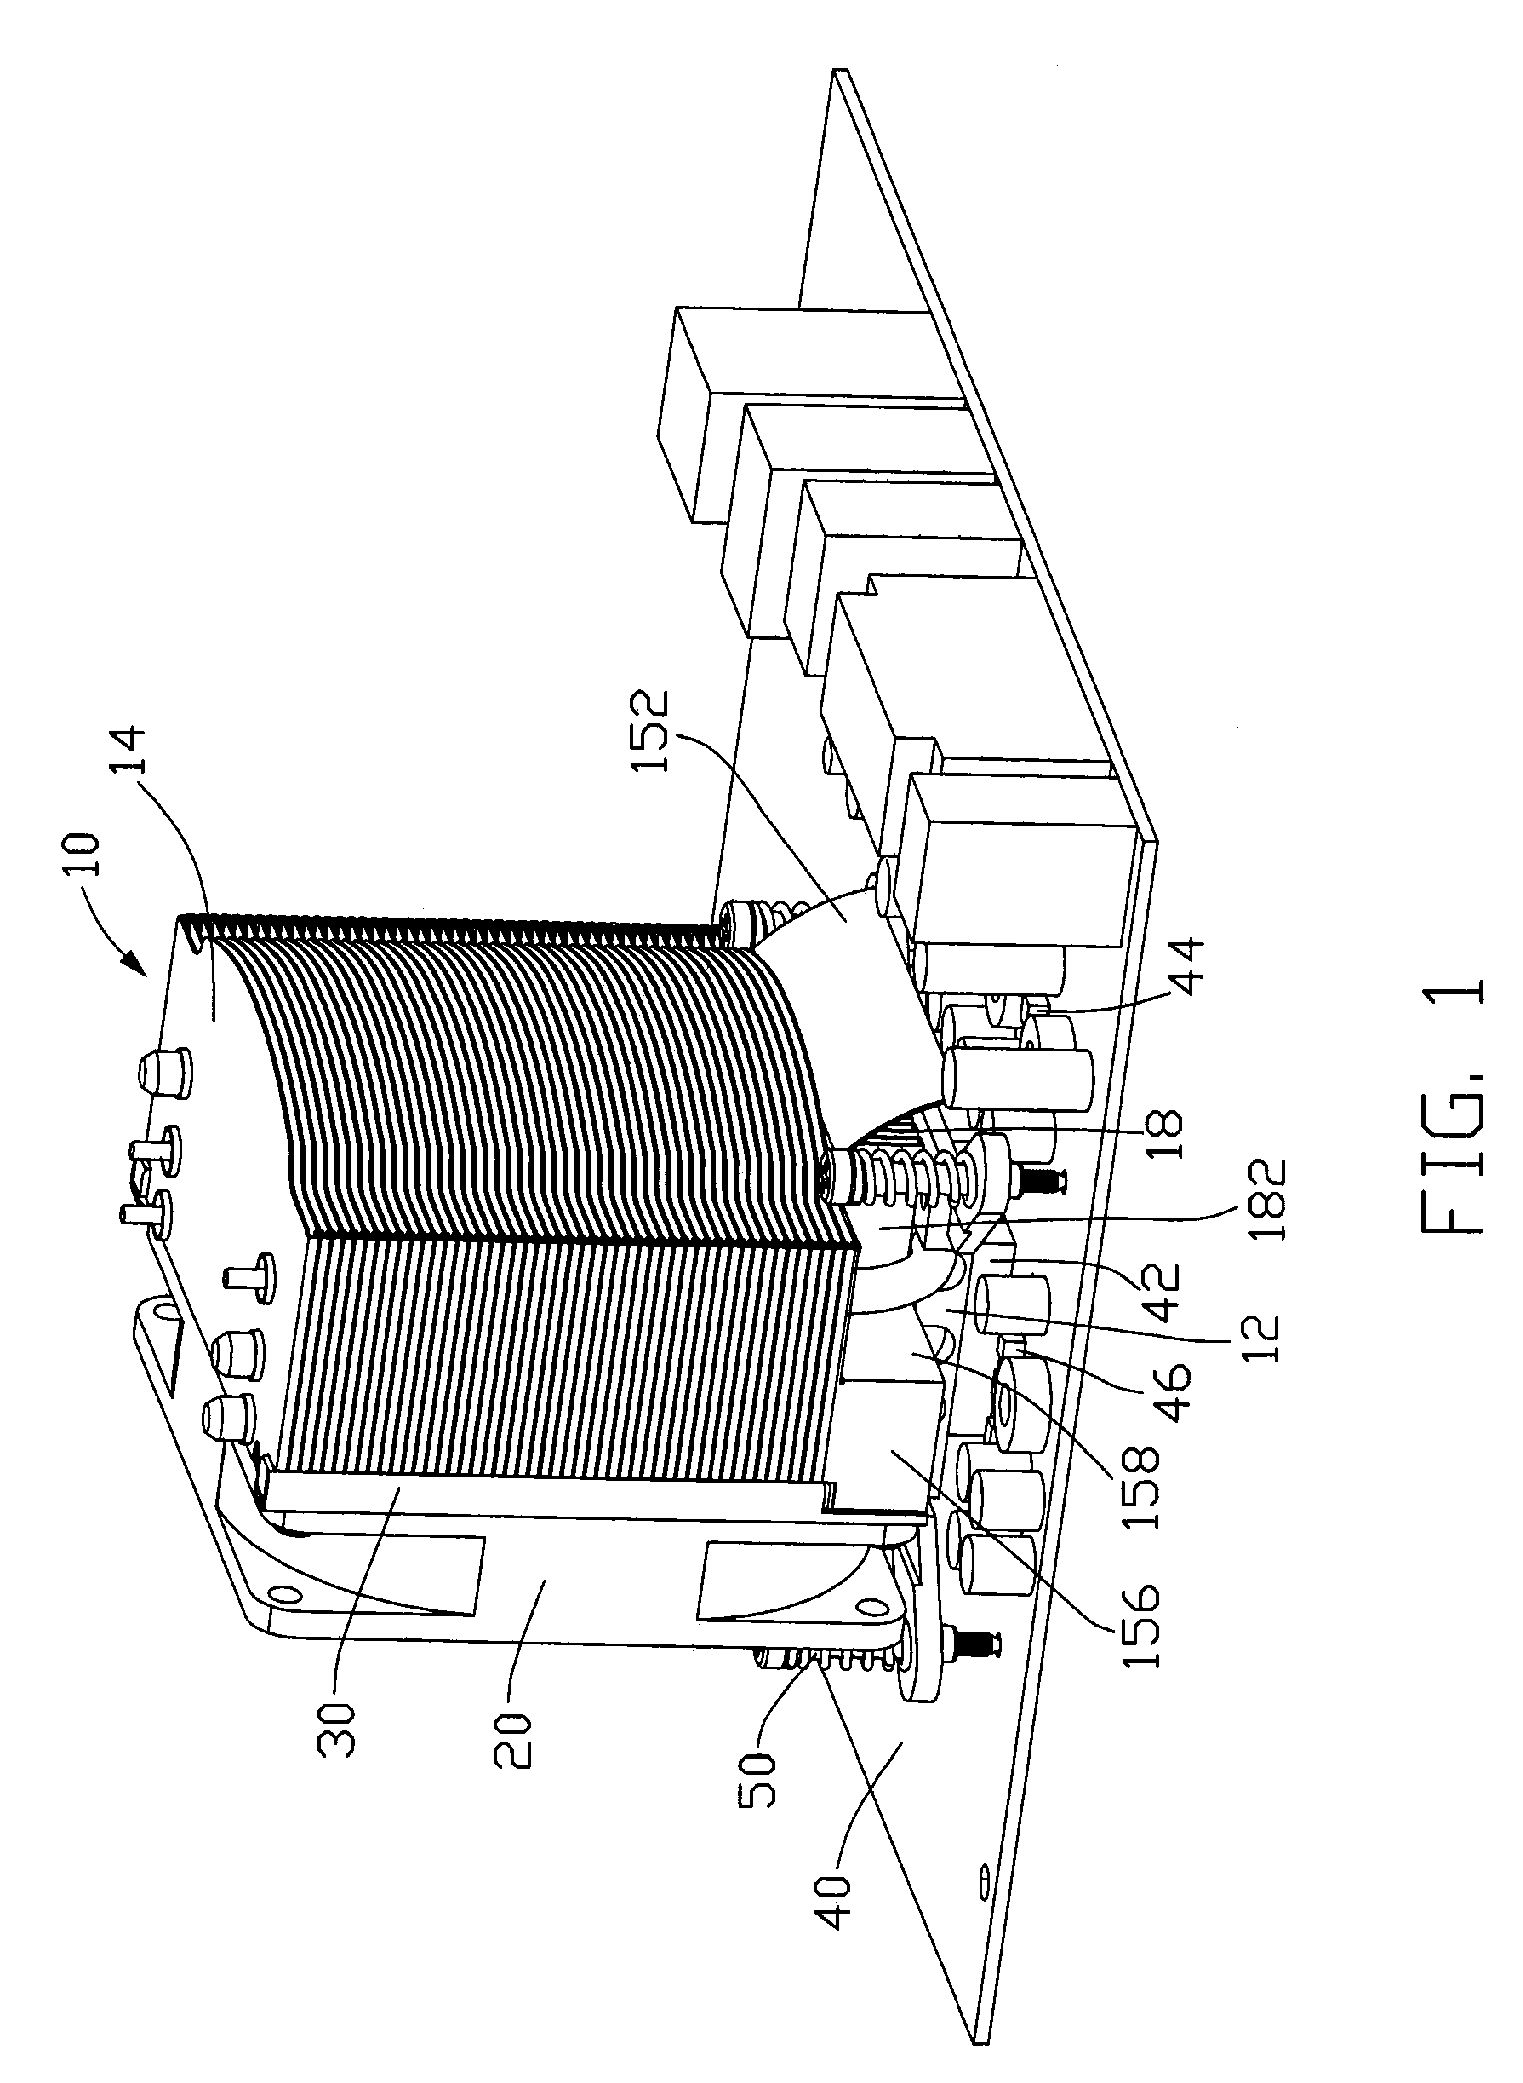 Heat dissipating device having a fin also functioning as a fan duct